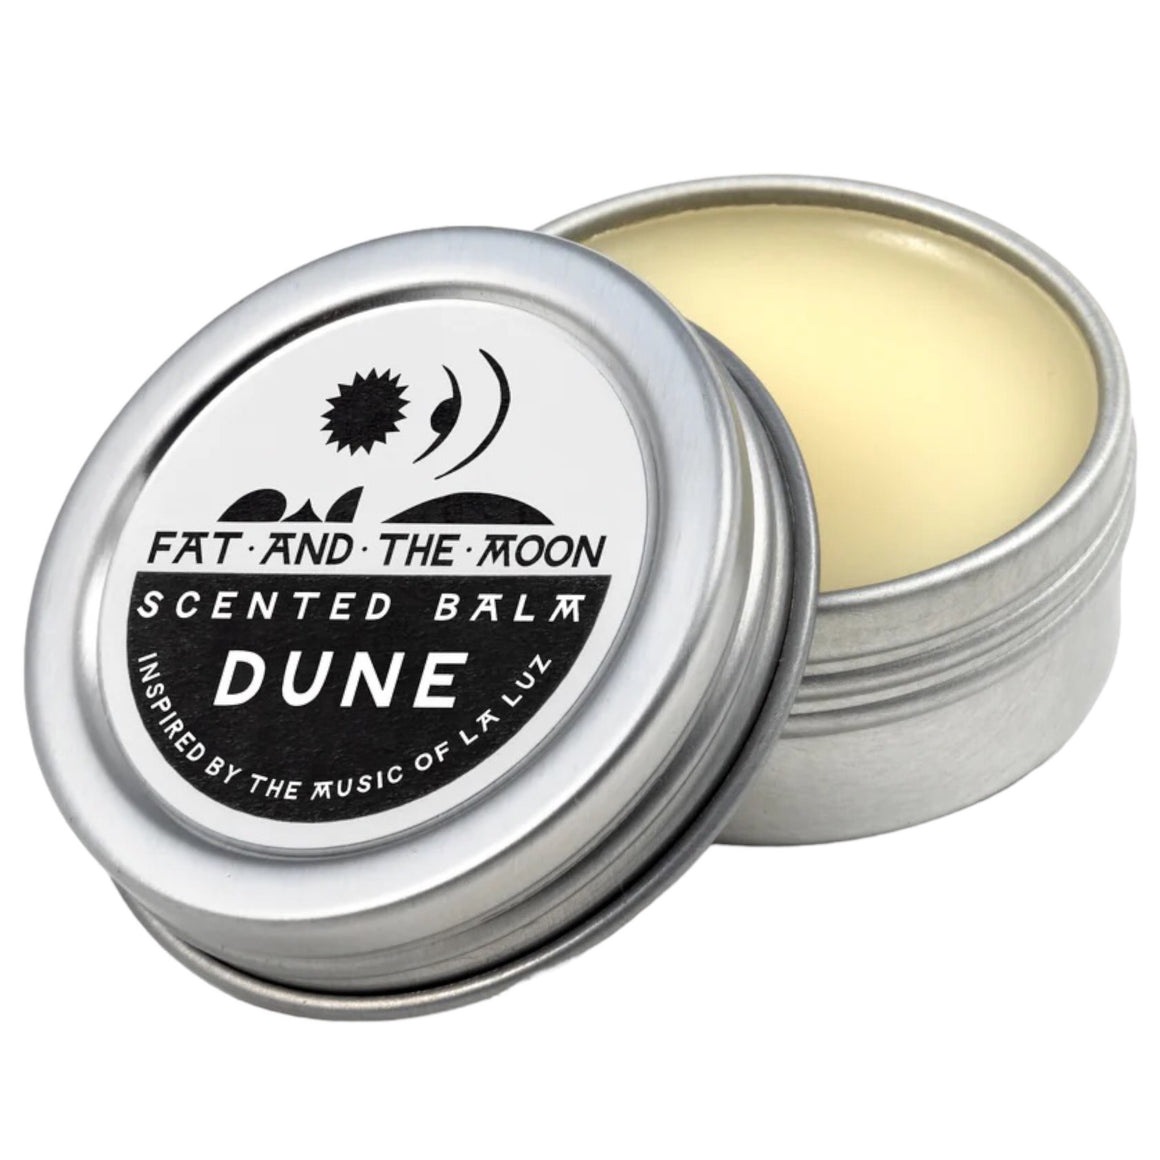 Dune Scent Balm 0.5oz - Fat & The Moon